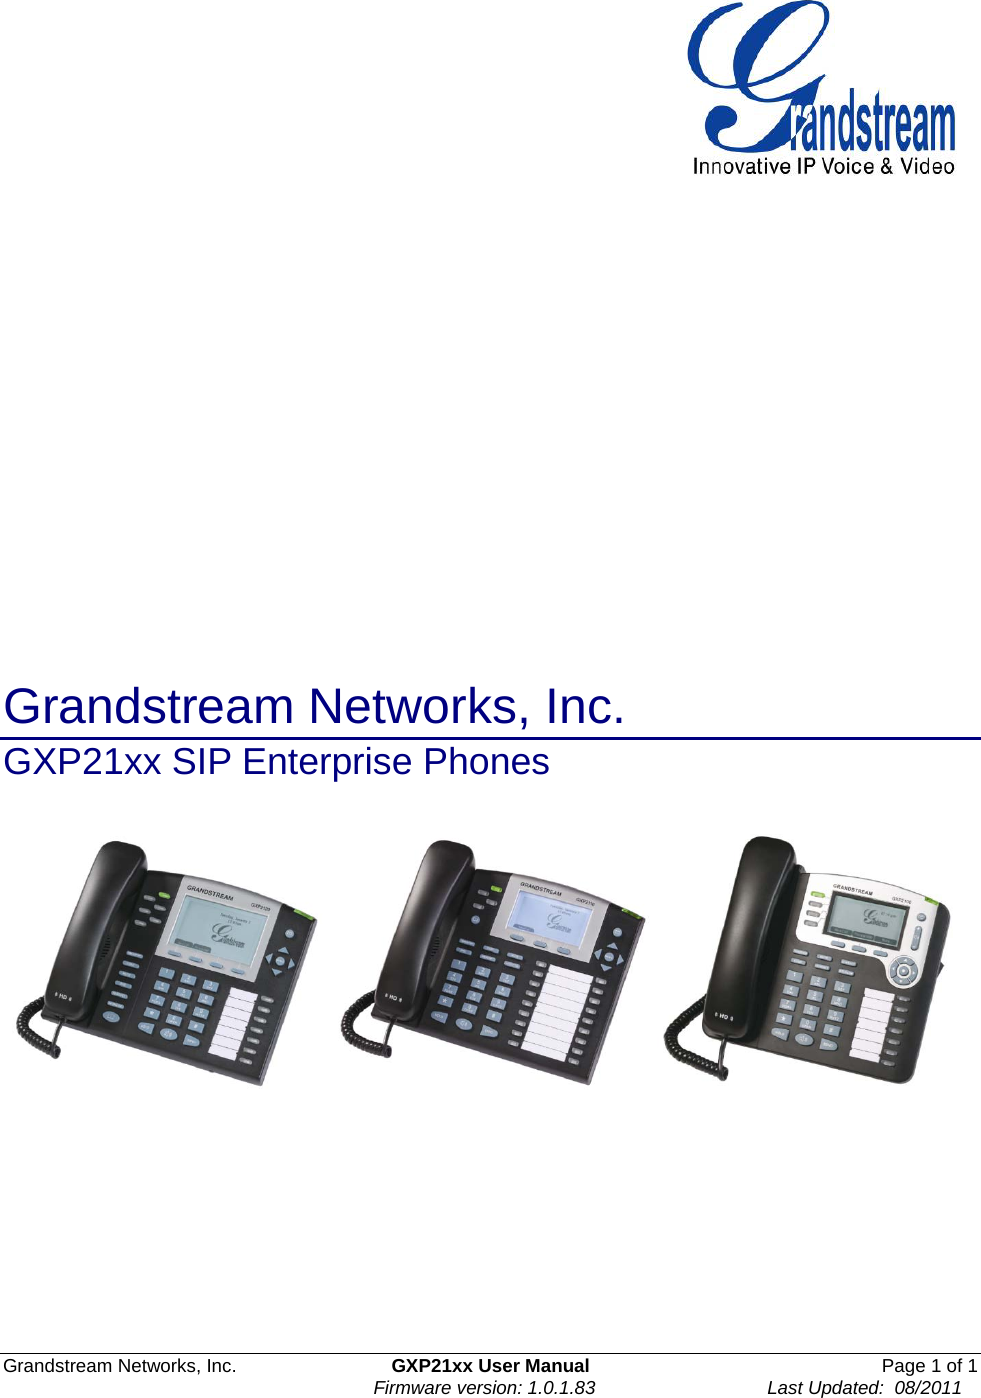  Grandstream Networks, Inc. GXP21xx User Manual Page 1 of 1                                                                      Firmware version: 1.0.1.83                                 Last Updated:  08/2011                      Grandstream Networks, Inc.   GXP21xx SIP Enterprise Phones                   